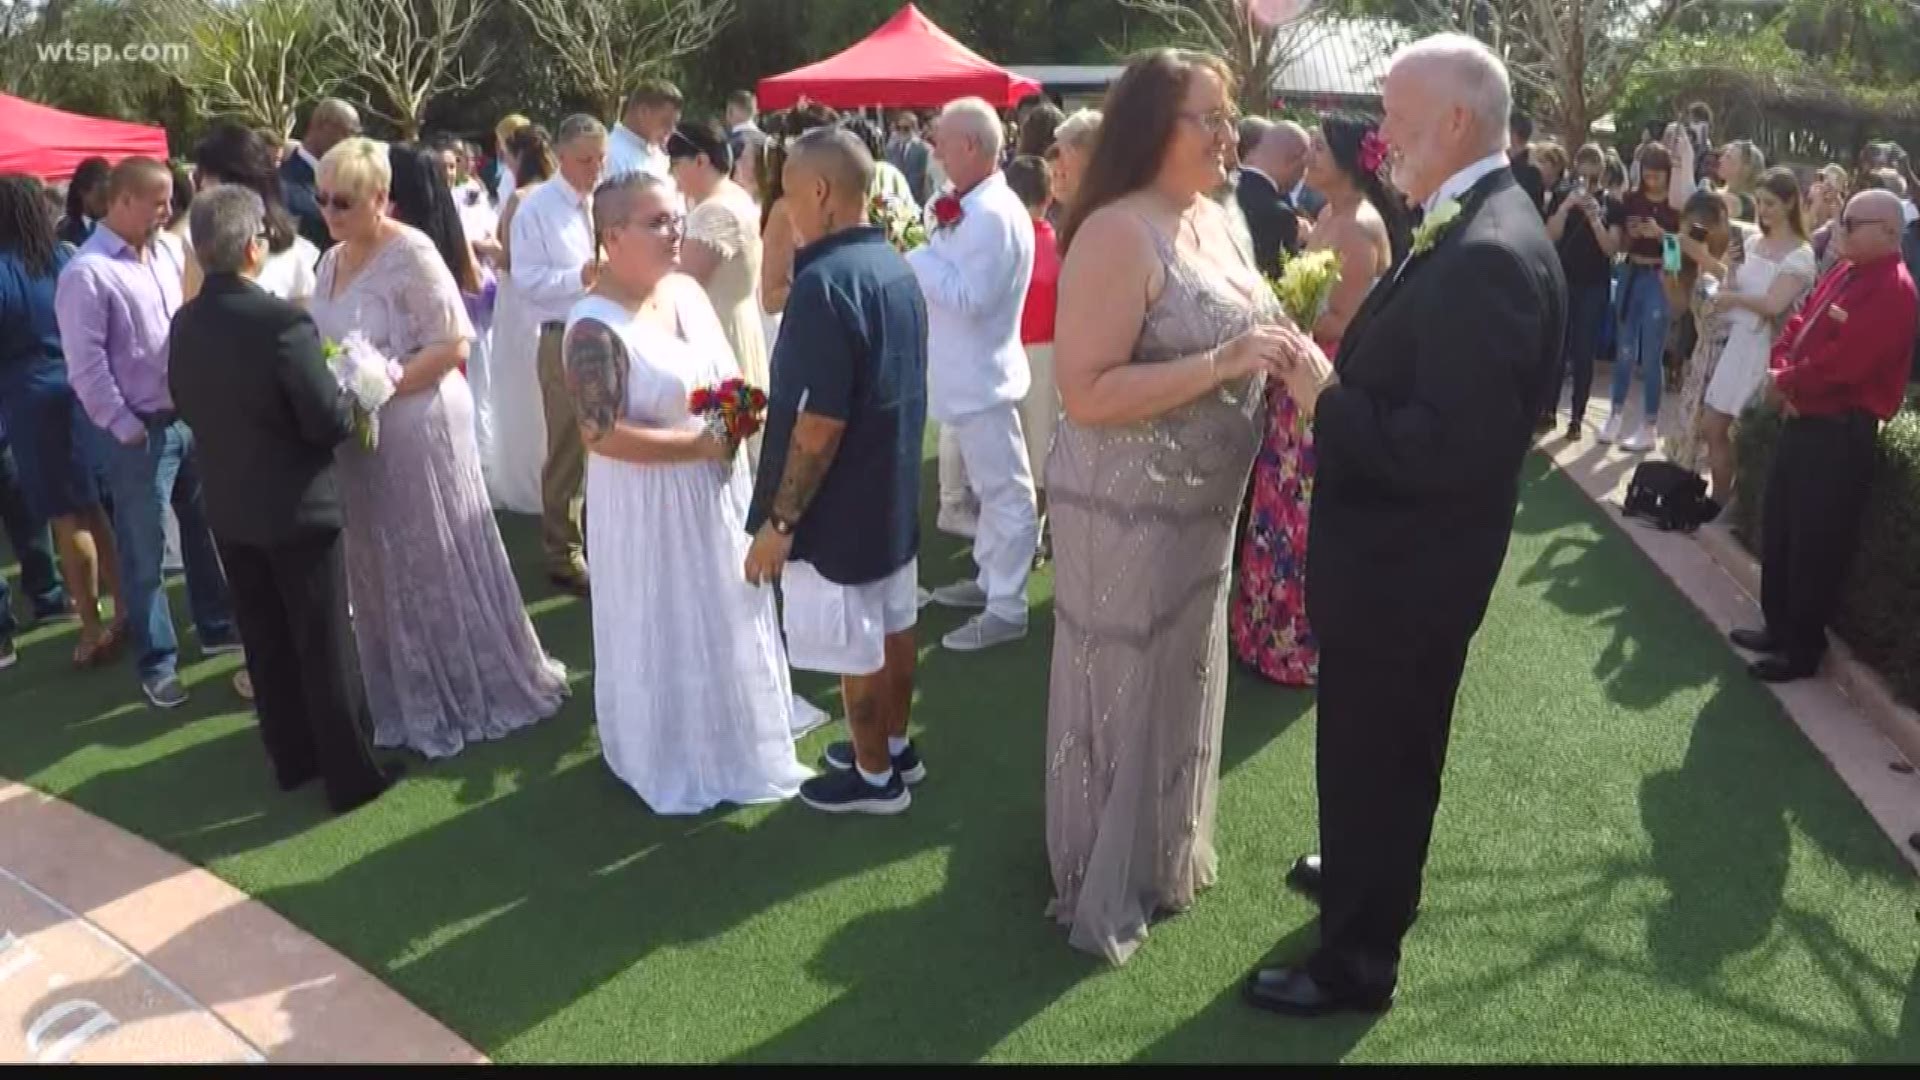 About 50 couples got married or renewed their vows all together at the Botanical Gardens in Largo.